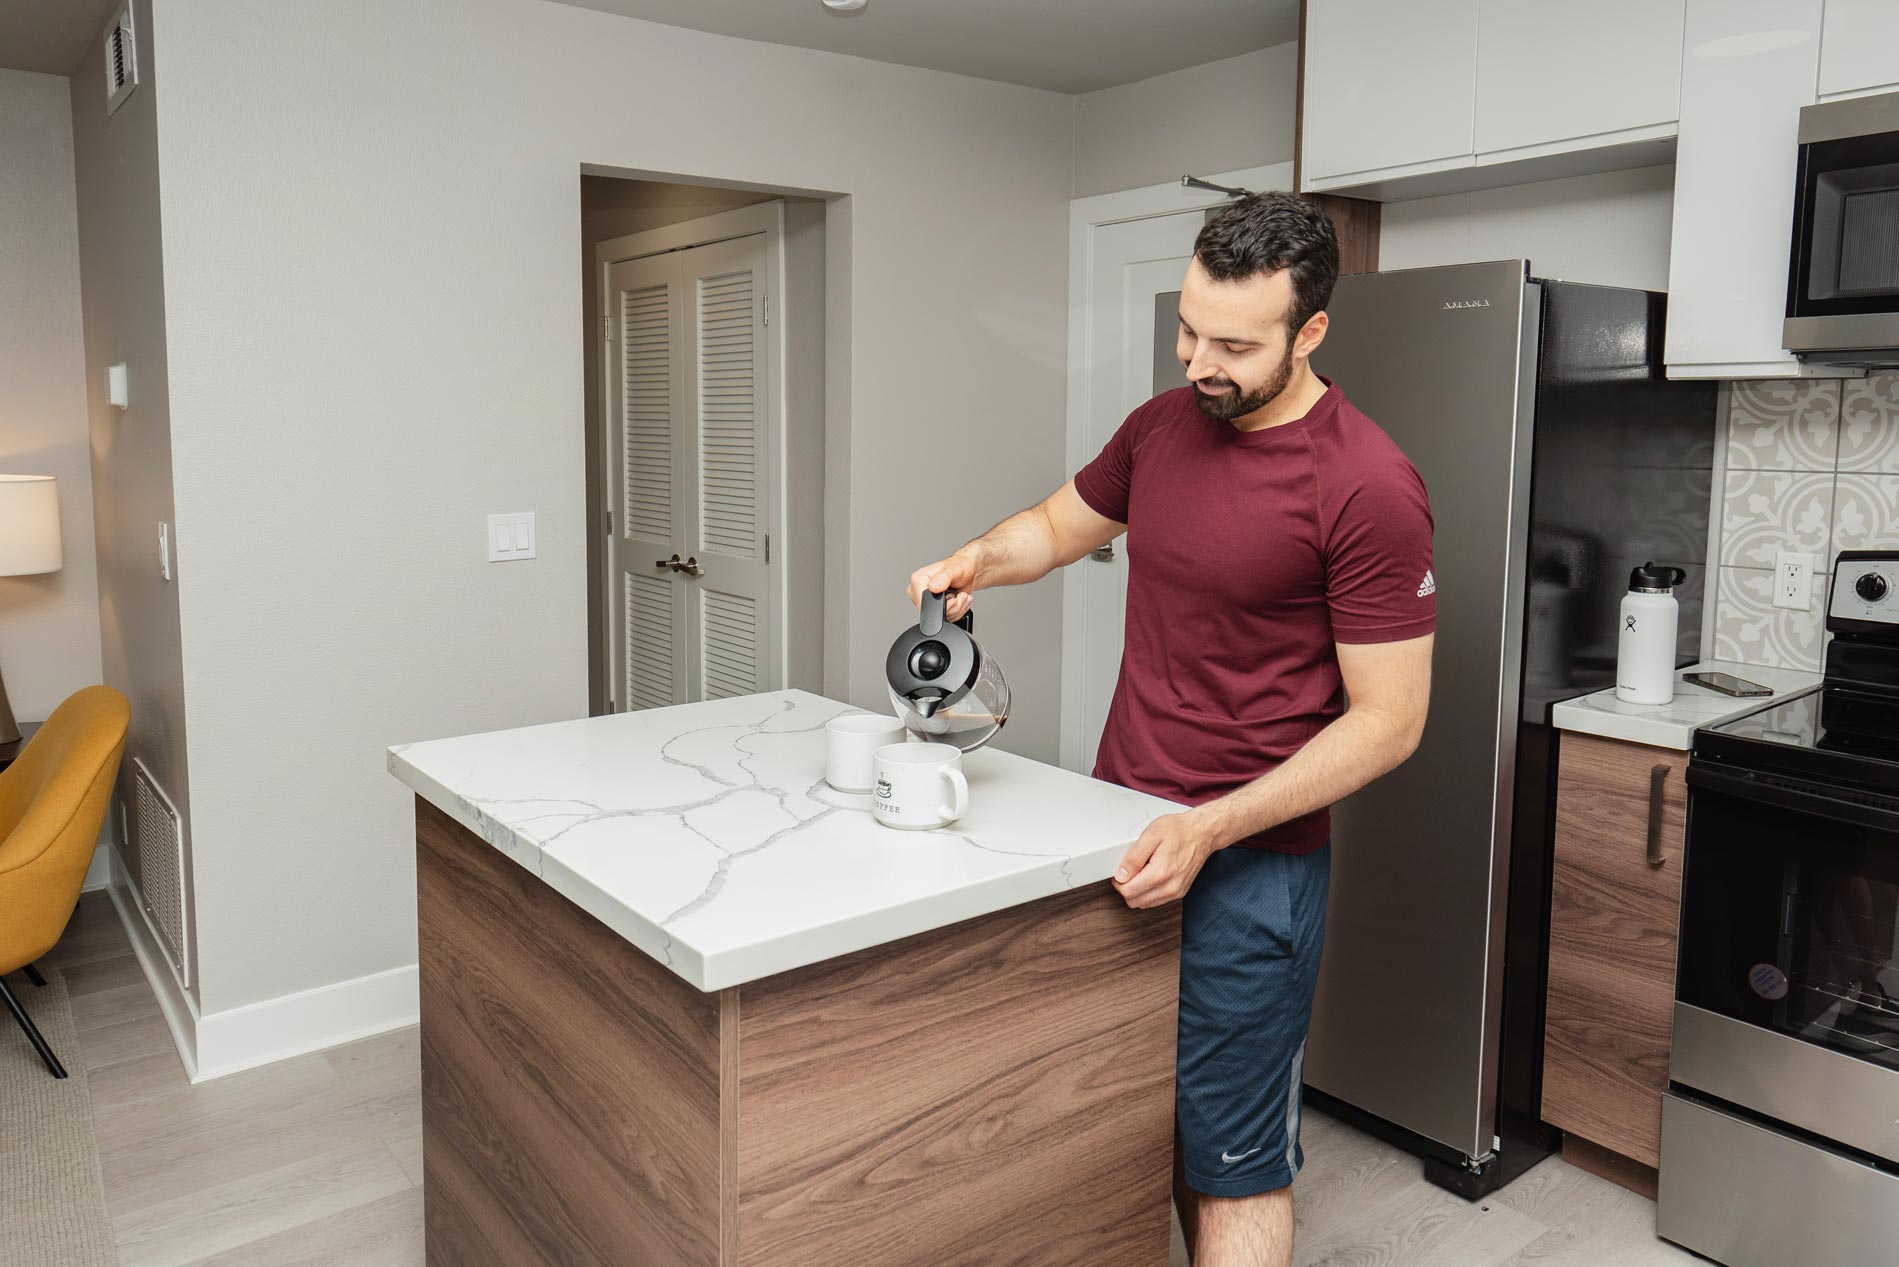 CitySouth man pours coffee in kitchen